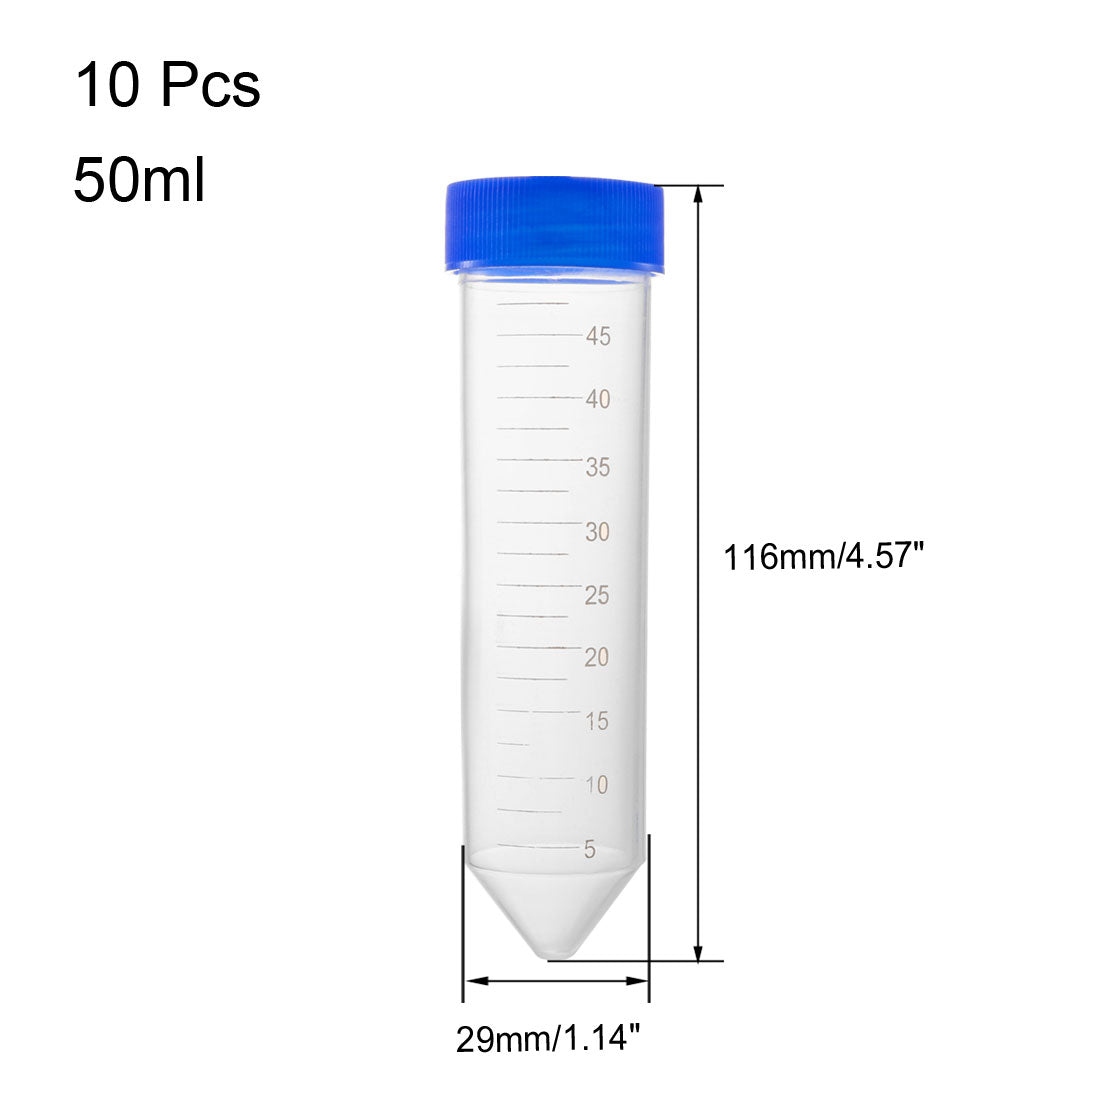 uxcell Uxcell 10 Pcs 45ml Plastic Centrifuge Tubes with Blue Screw Cap, Conical Bottom, Graduated Marks